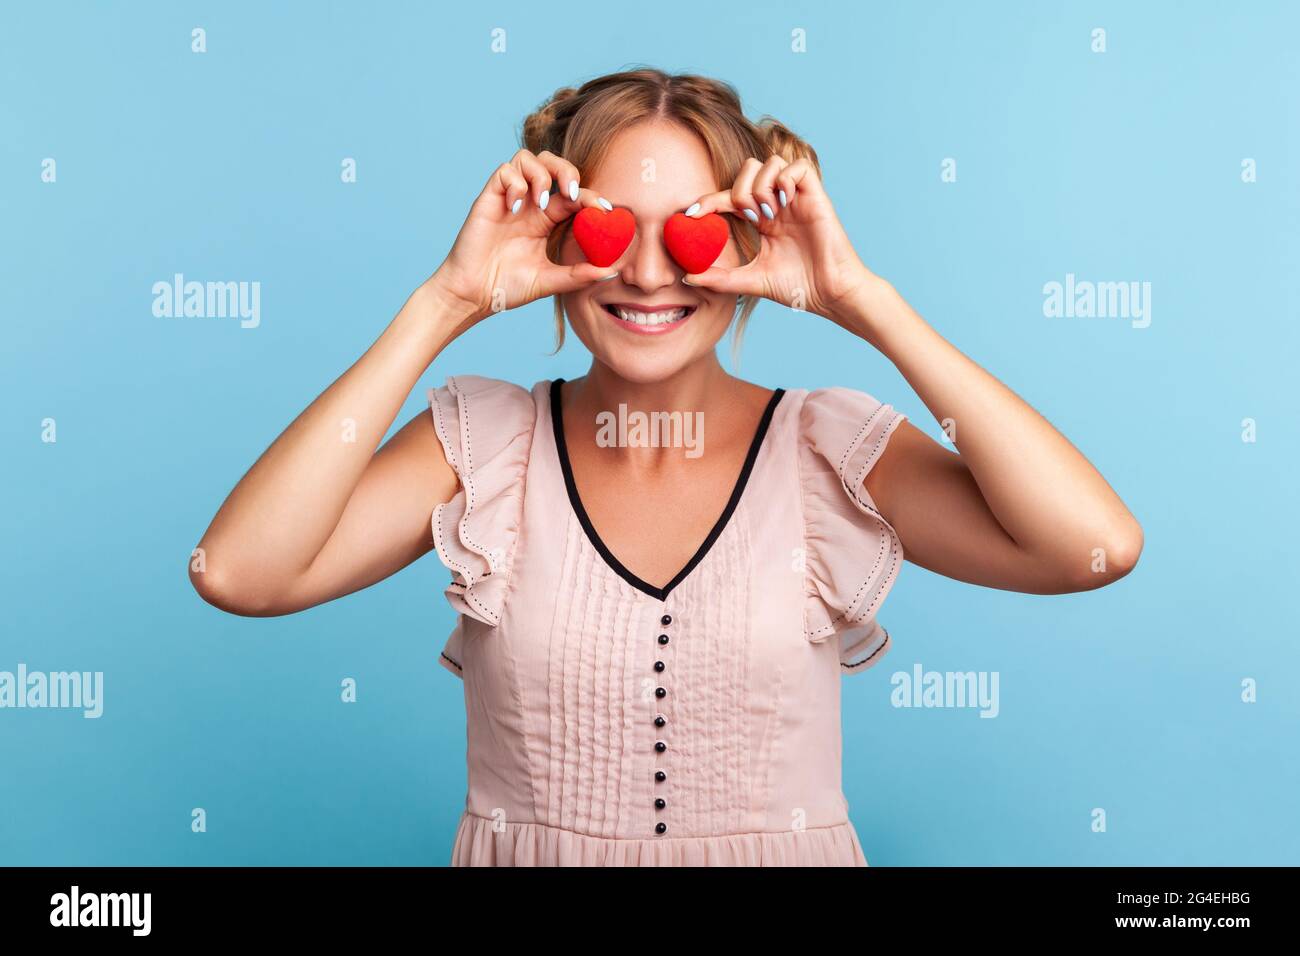 Portrait of beautiful blonde haired female with hair buns in dress covering eyes with heart shape symbols, expressing romantic feelings, friendship. I Stock Photo